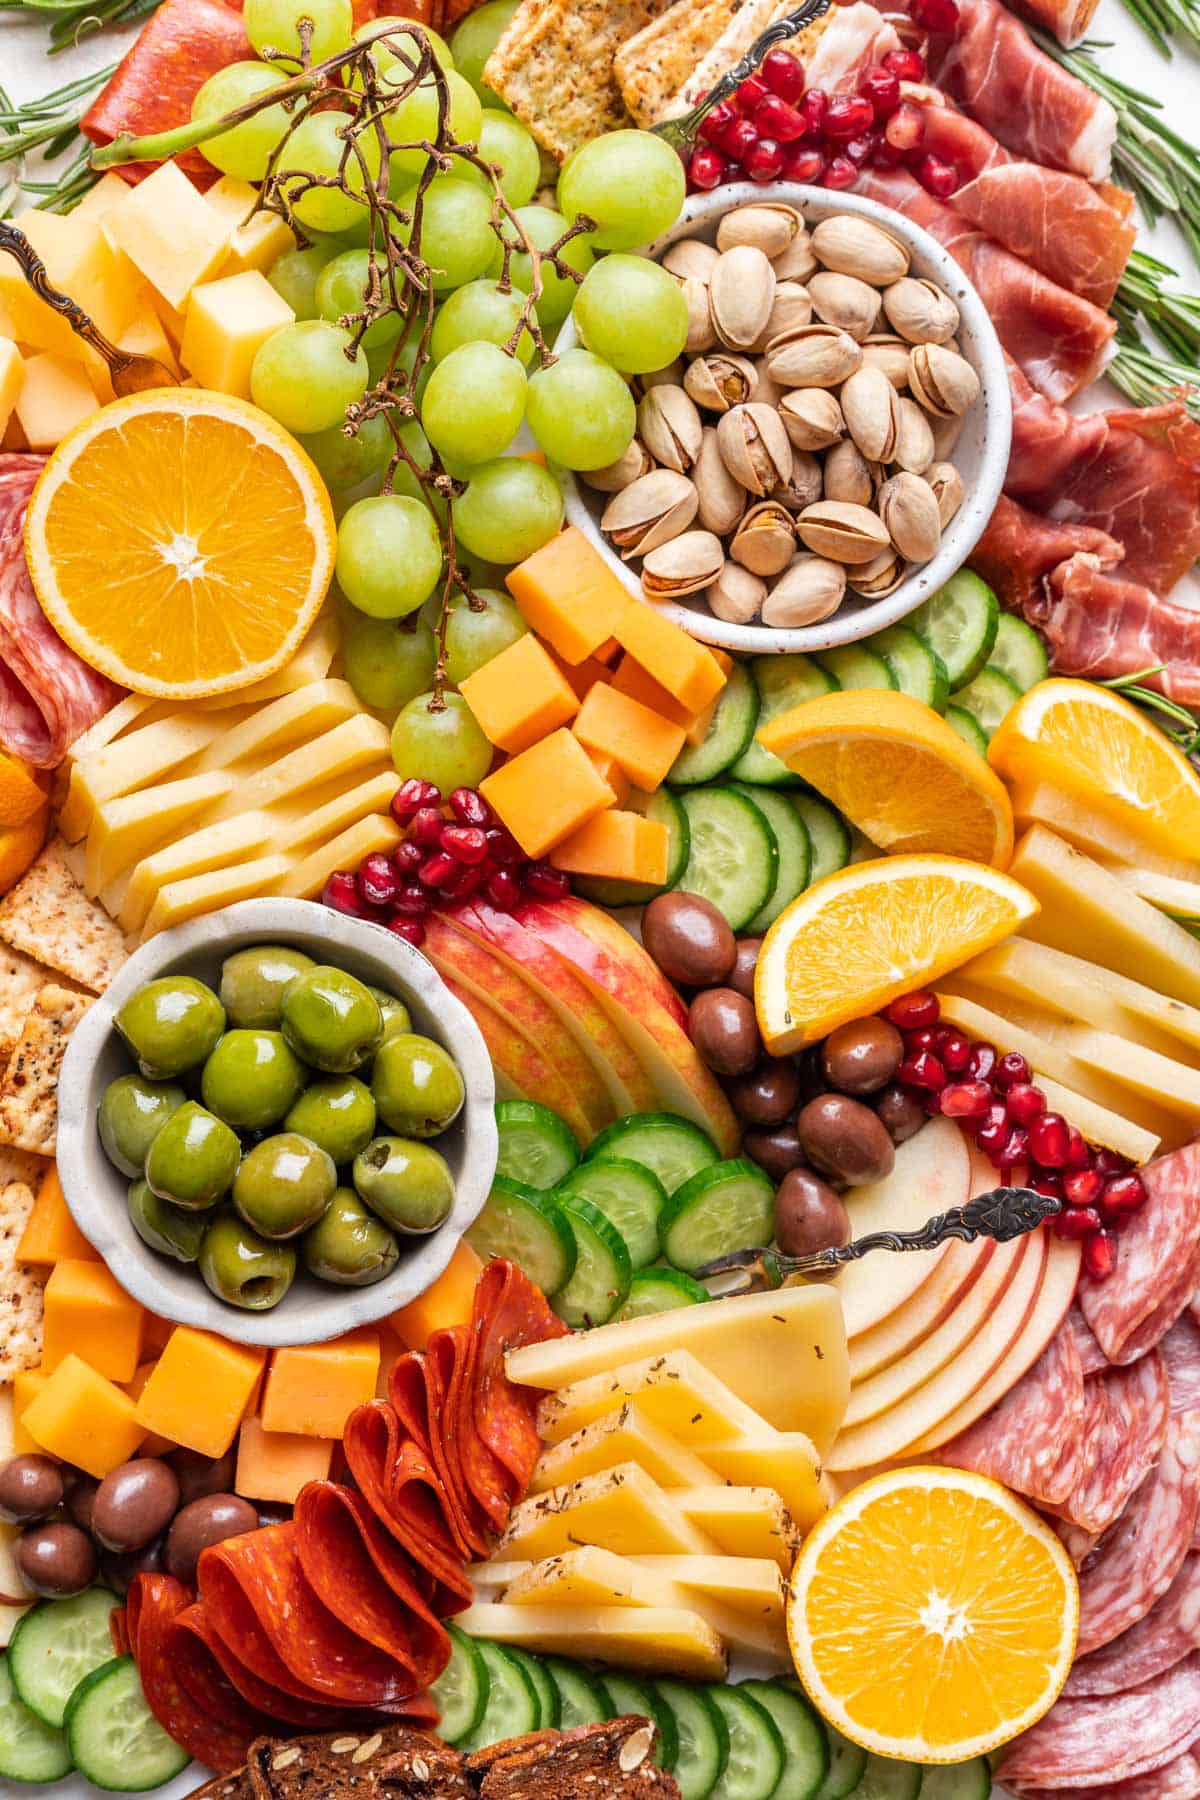 Meats, cheeses, sliced fruits, olives, nuts, and veggies make up a Christmas charcuterie board.